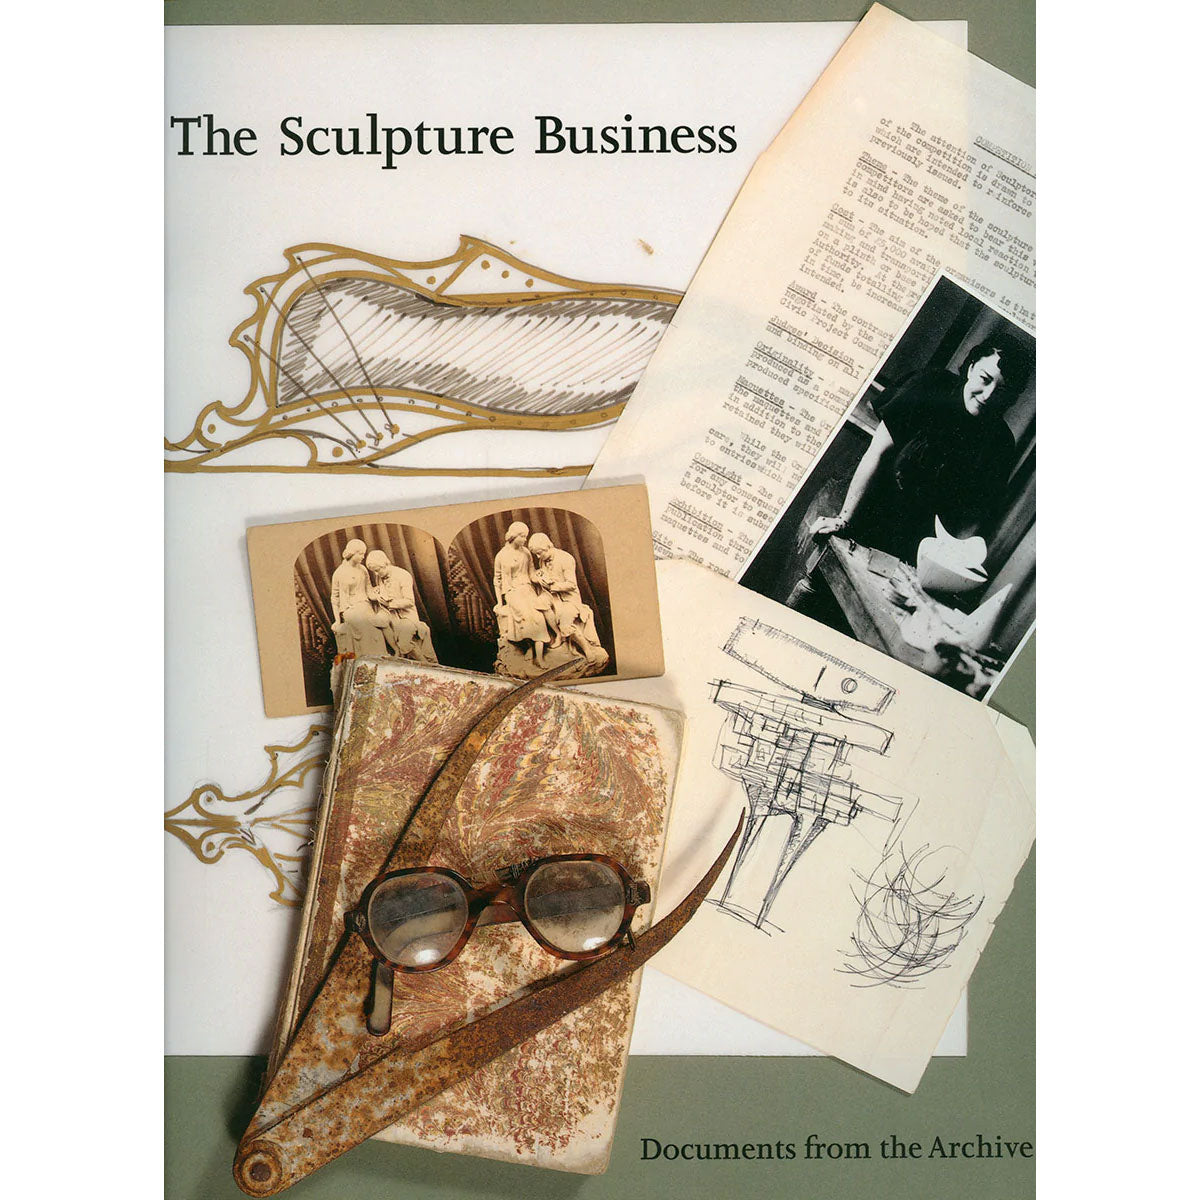 The Sculpture Business: Documents from the Archive